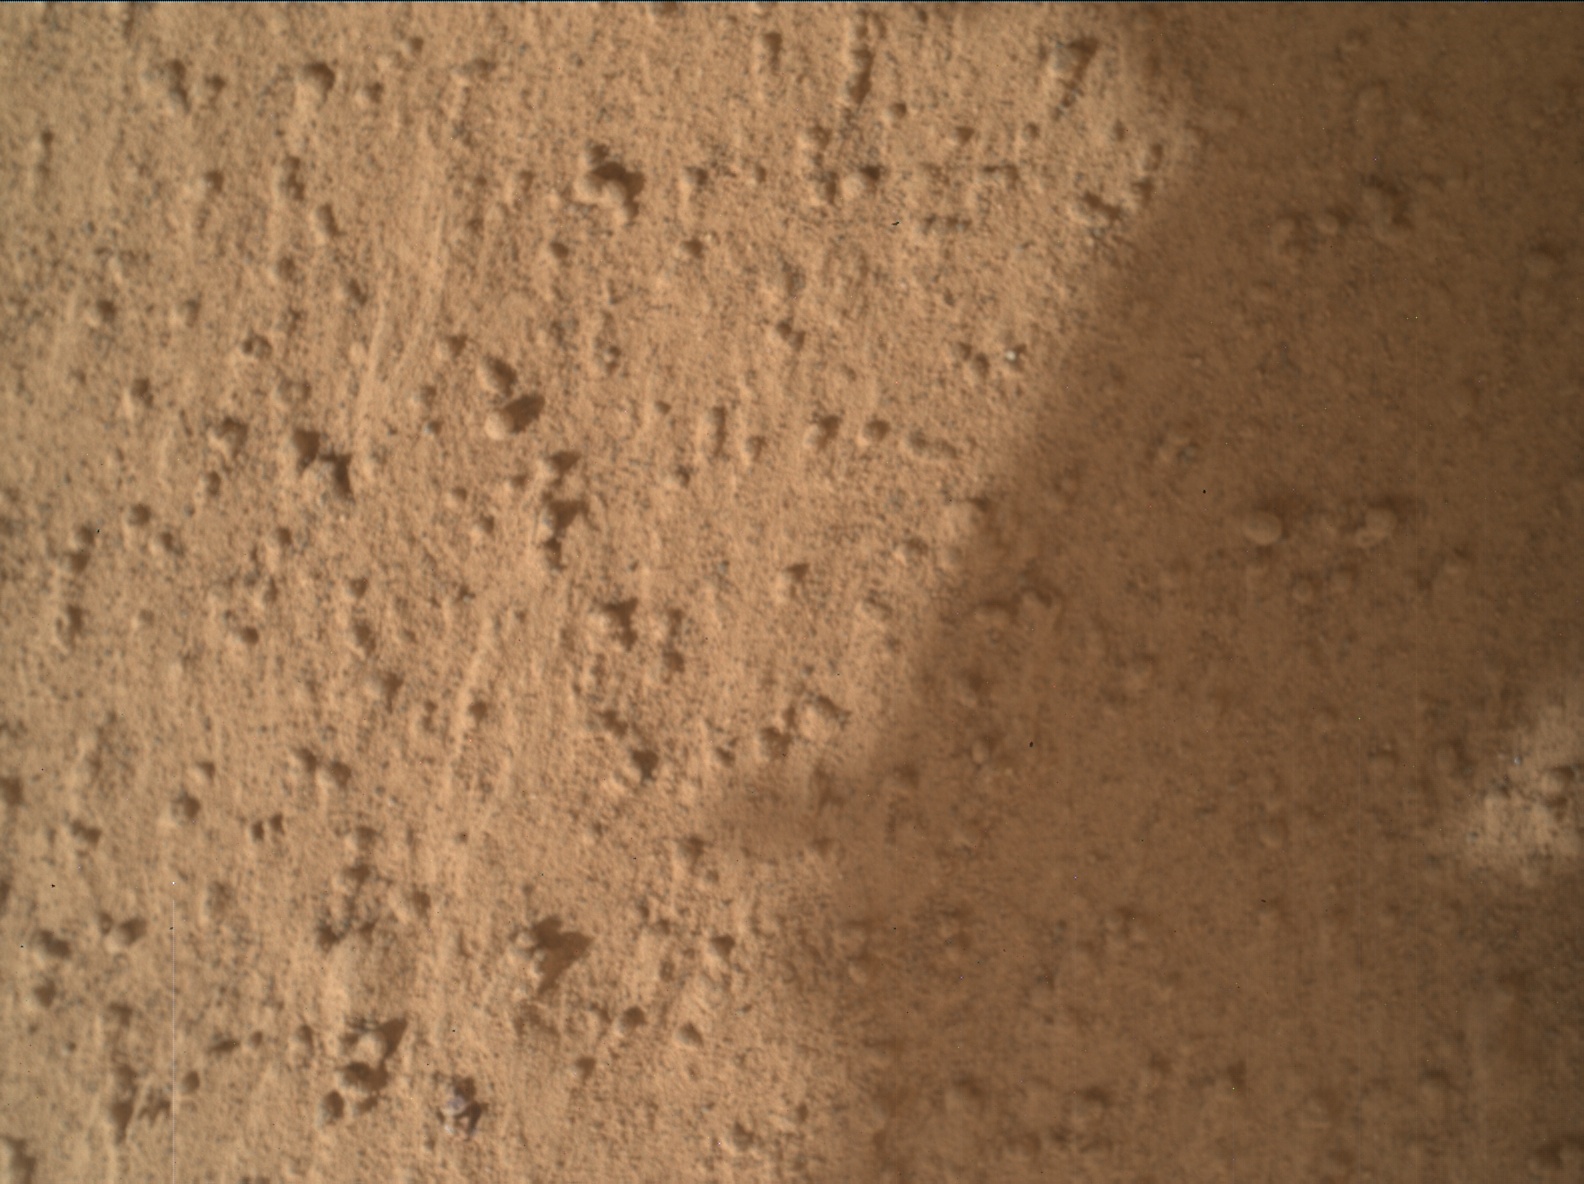 Nasa's Mars rover Curiosity acquired this image using its Mars Hand Lens Imager (MAHLI) on Sol 3378